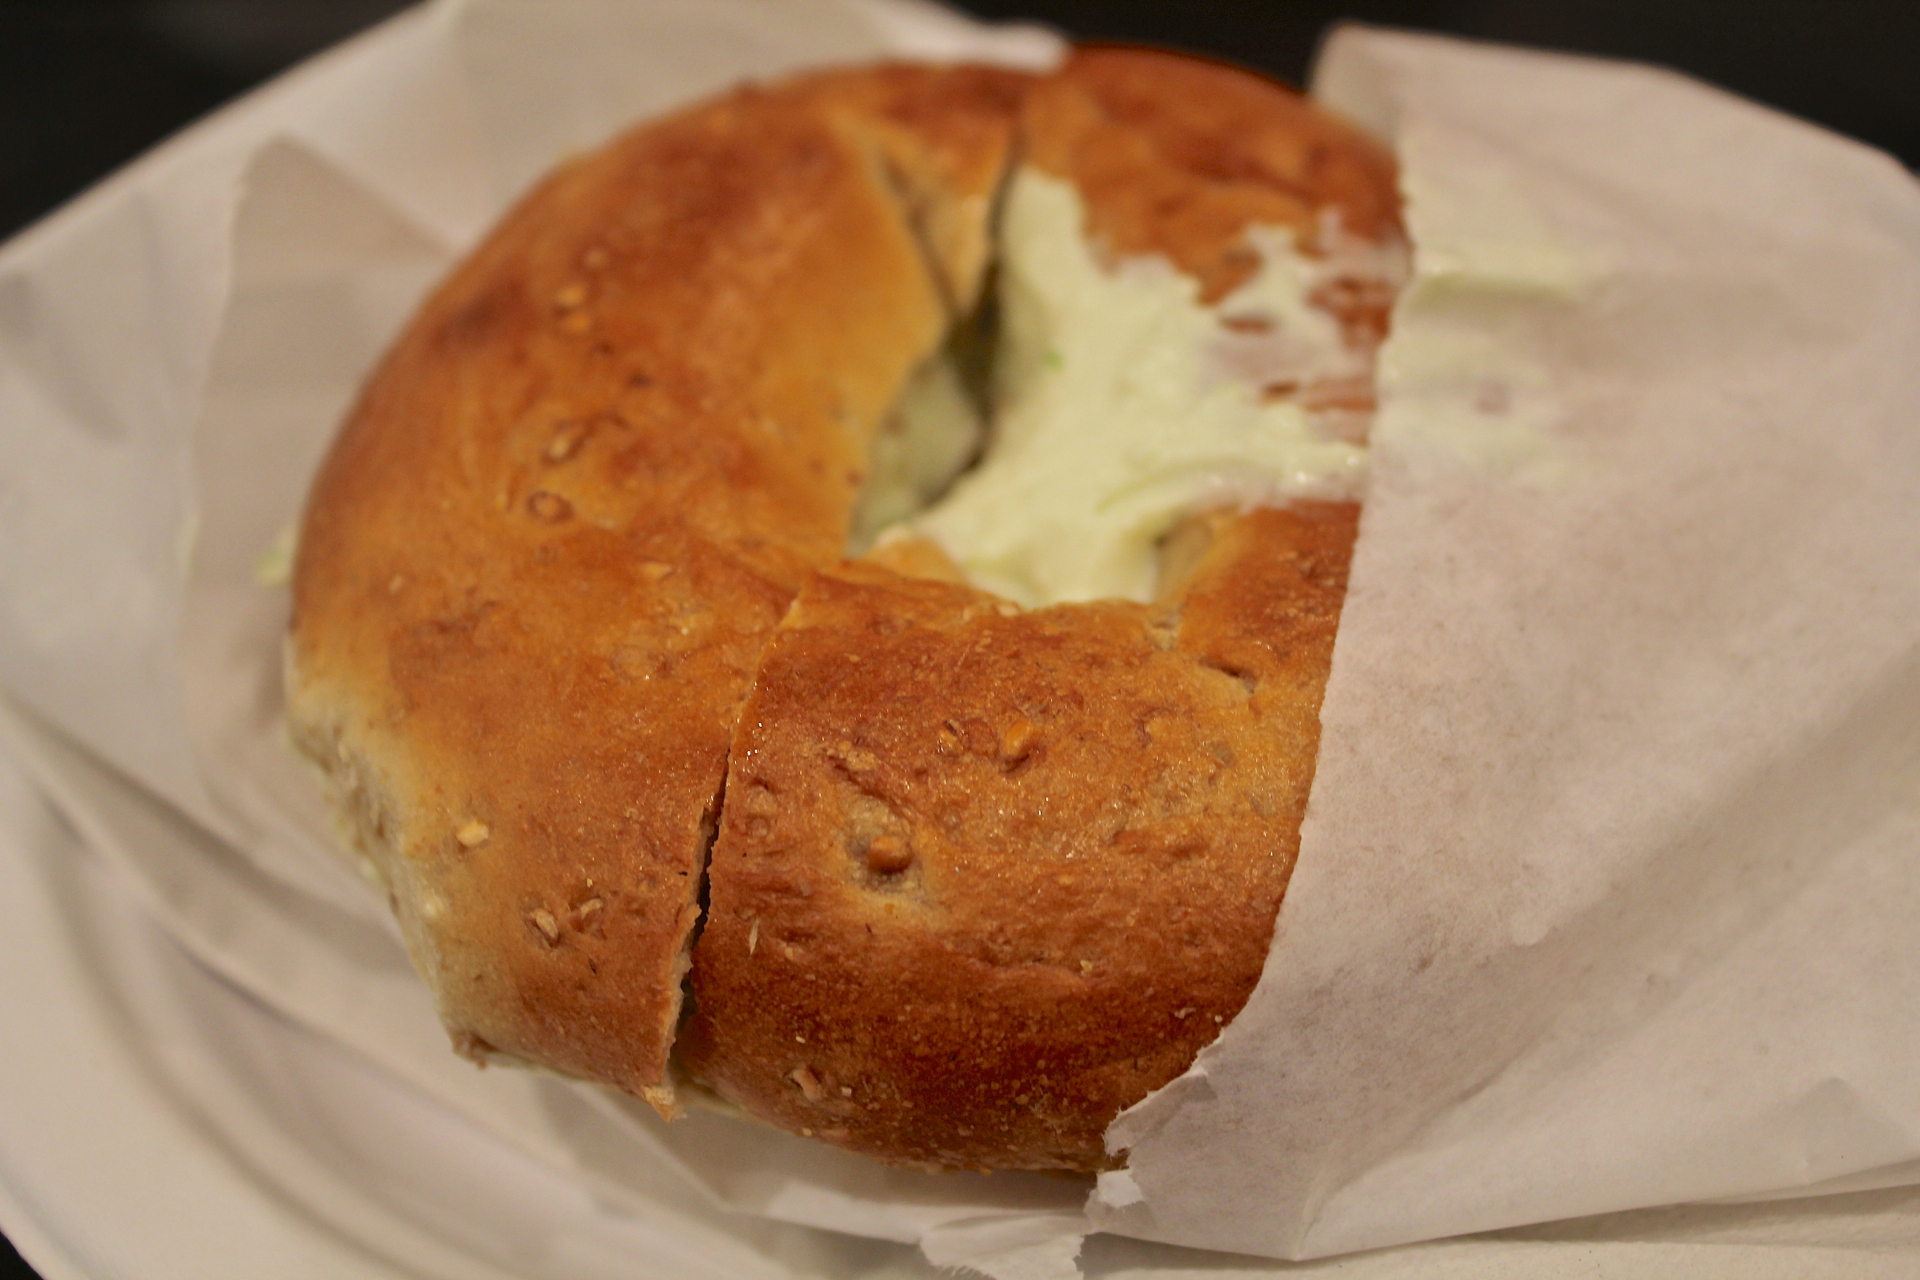 A whole wheat bagel with plain cream cheese at Izzy’s Brooklyn Bagels.